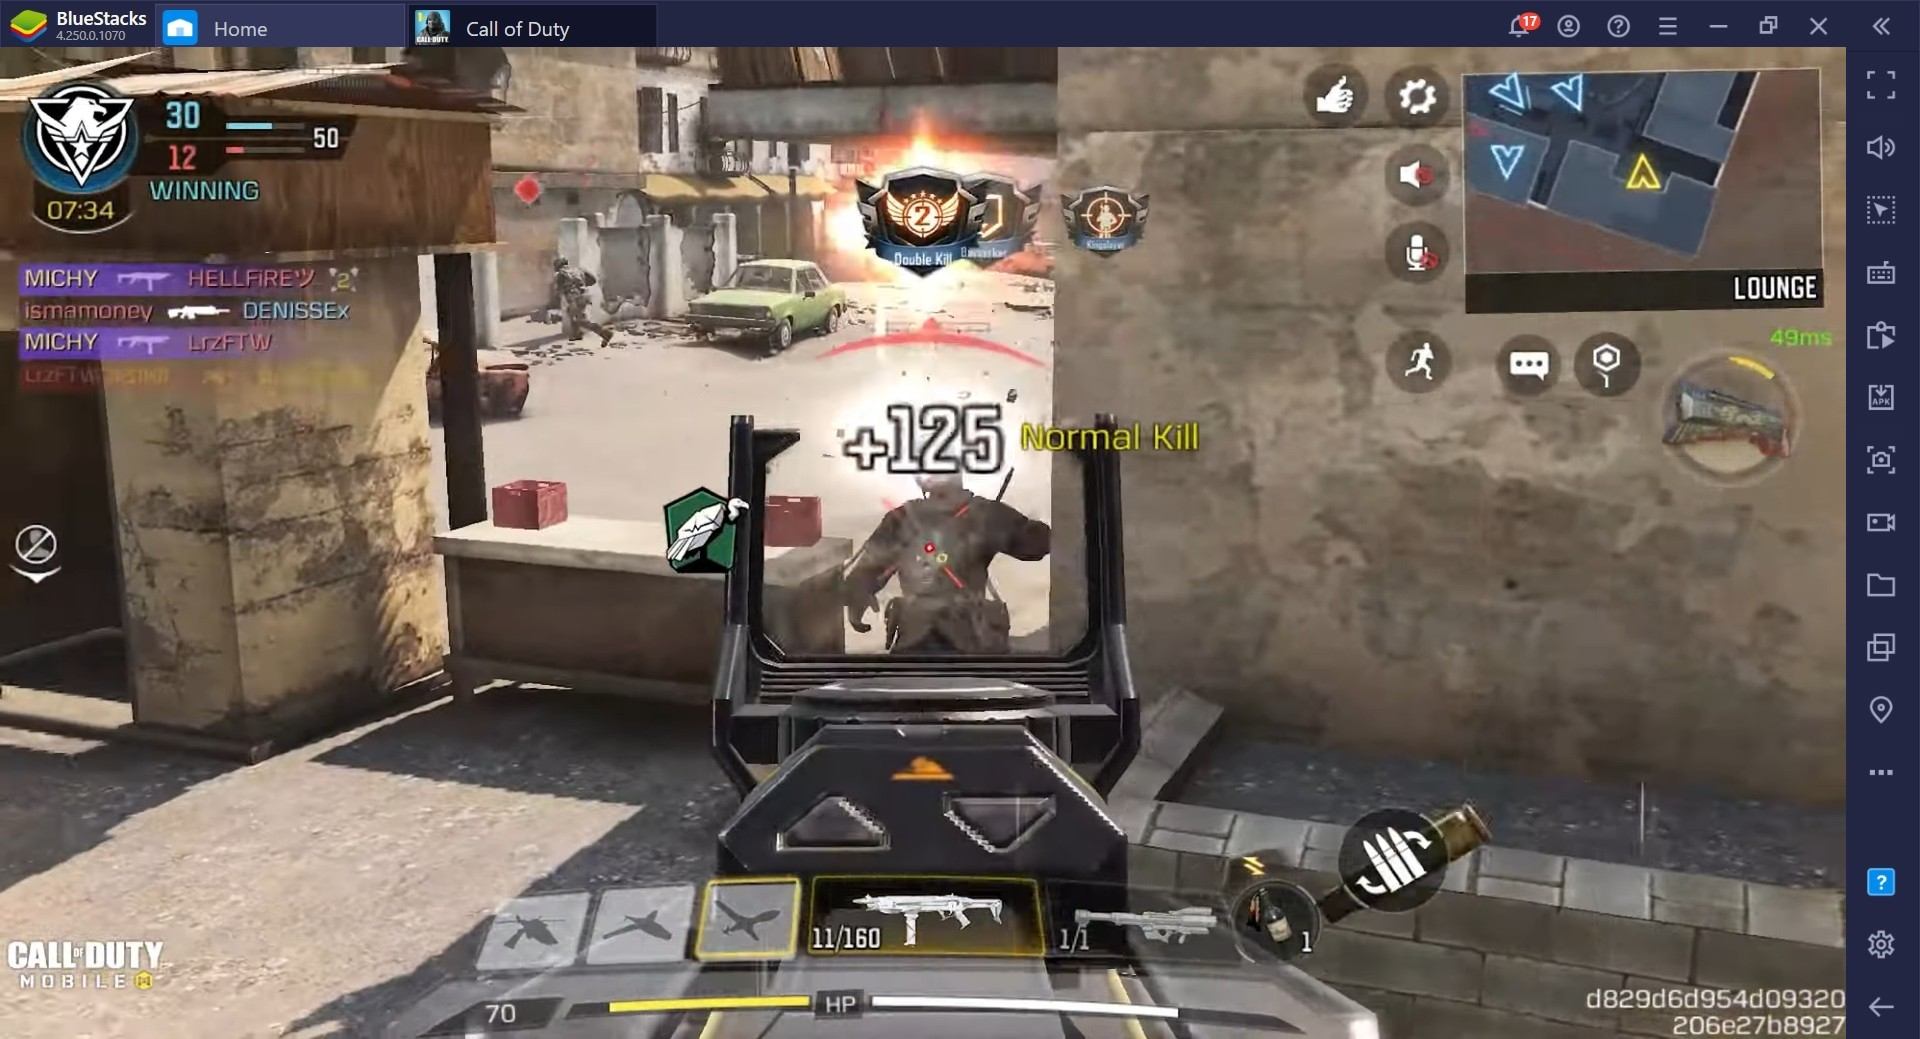 Carrying Solo in Call of Duty: Mobile Multiplayer Matches, It's Way Harder